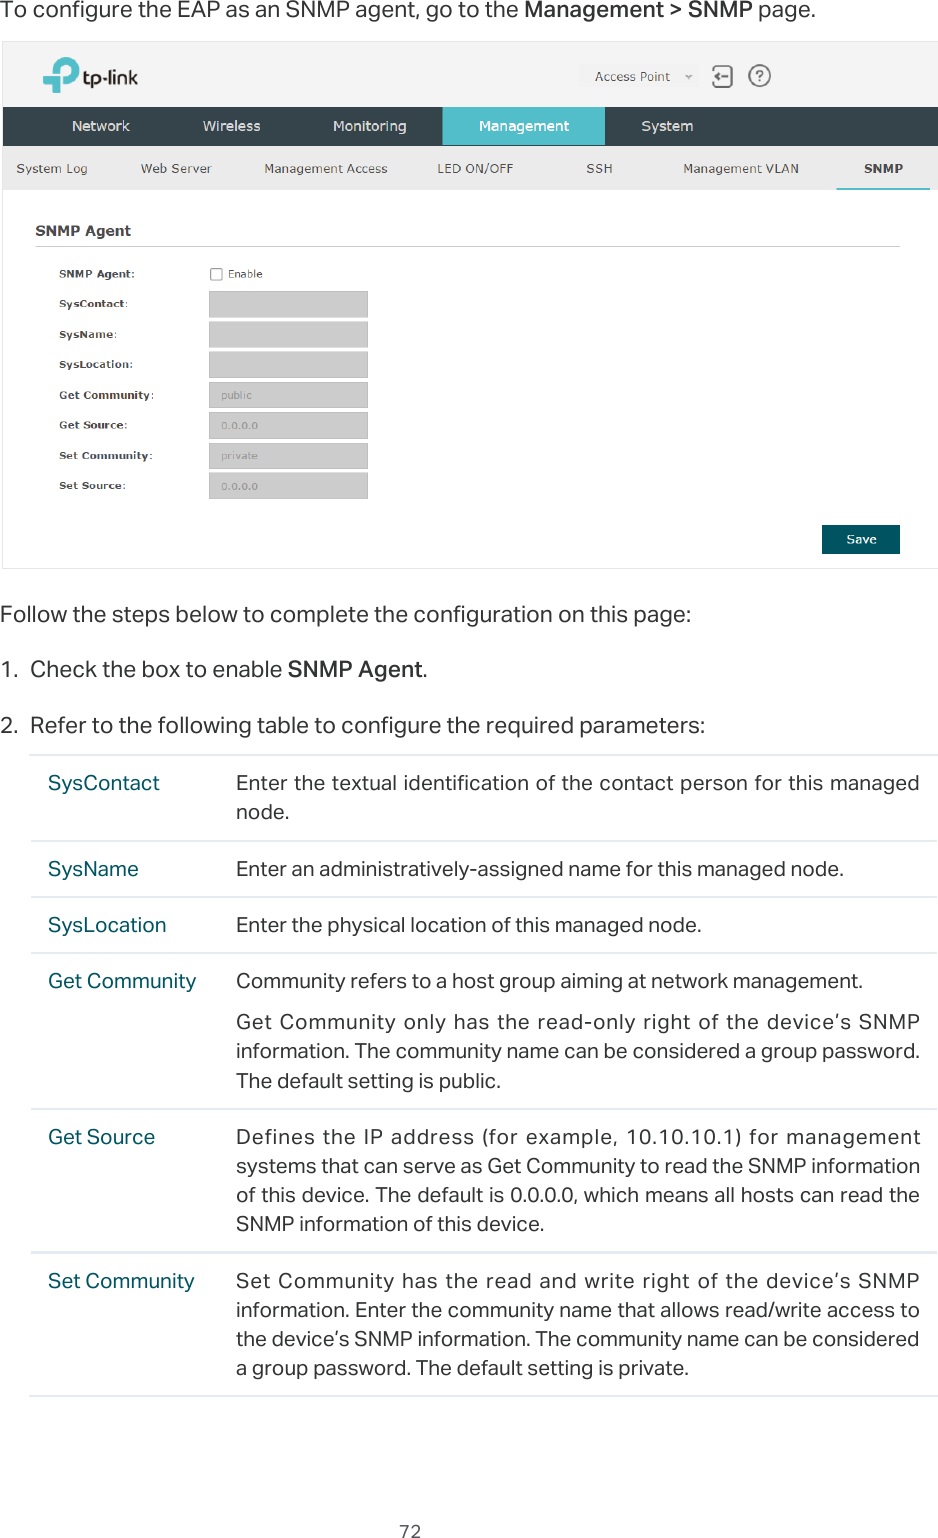  72To configure the EAP as an SNMP agent, go to the Management &gt; SNMP page.Follow the steps below to complete the configuration on this page:1. Check the box to enable SNMP Agent.2. Refer to the following table to configure the required parameters:SysContact Enter the textual identification of the contact person for this managed node.SysName Enter an administratively-assigned name for this managed node.SysLocation Enter the physical location of this managed node.Get Community Community refers to a host group aiming at network management.Get Community only has the read-only right of the device’s SNMP information. The community name can be considered a group password. The default setting is public.Get Source Defines the IP address (for example, 10.10.10.1) for management systems that can serve as Get Community to read the SNMP information of this device. The default is 0.0.0.0, which means all hosts can read the SNMP information of this device.Set Community Set Community has the read and write right of the device’s SNMP information. Enter the community name that allows read/write access to the device’s SNMP information. The community name can be considered a group password. The default setting is private.